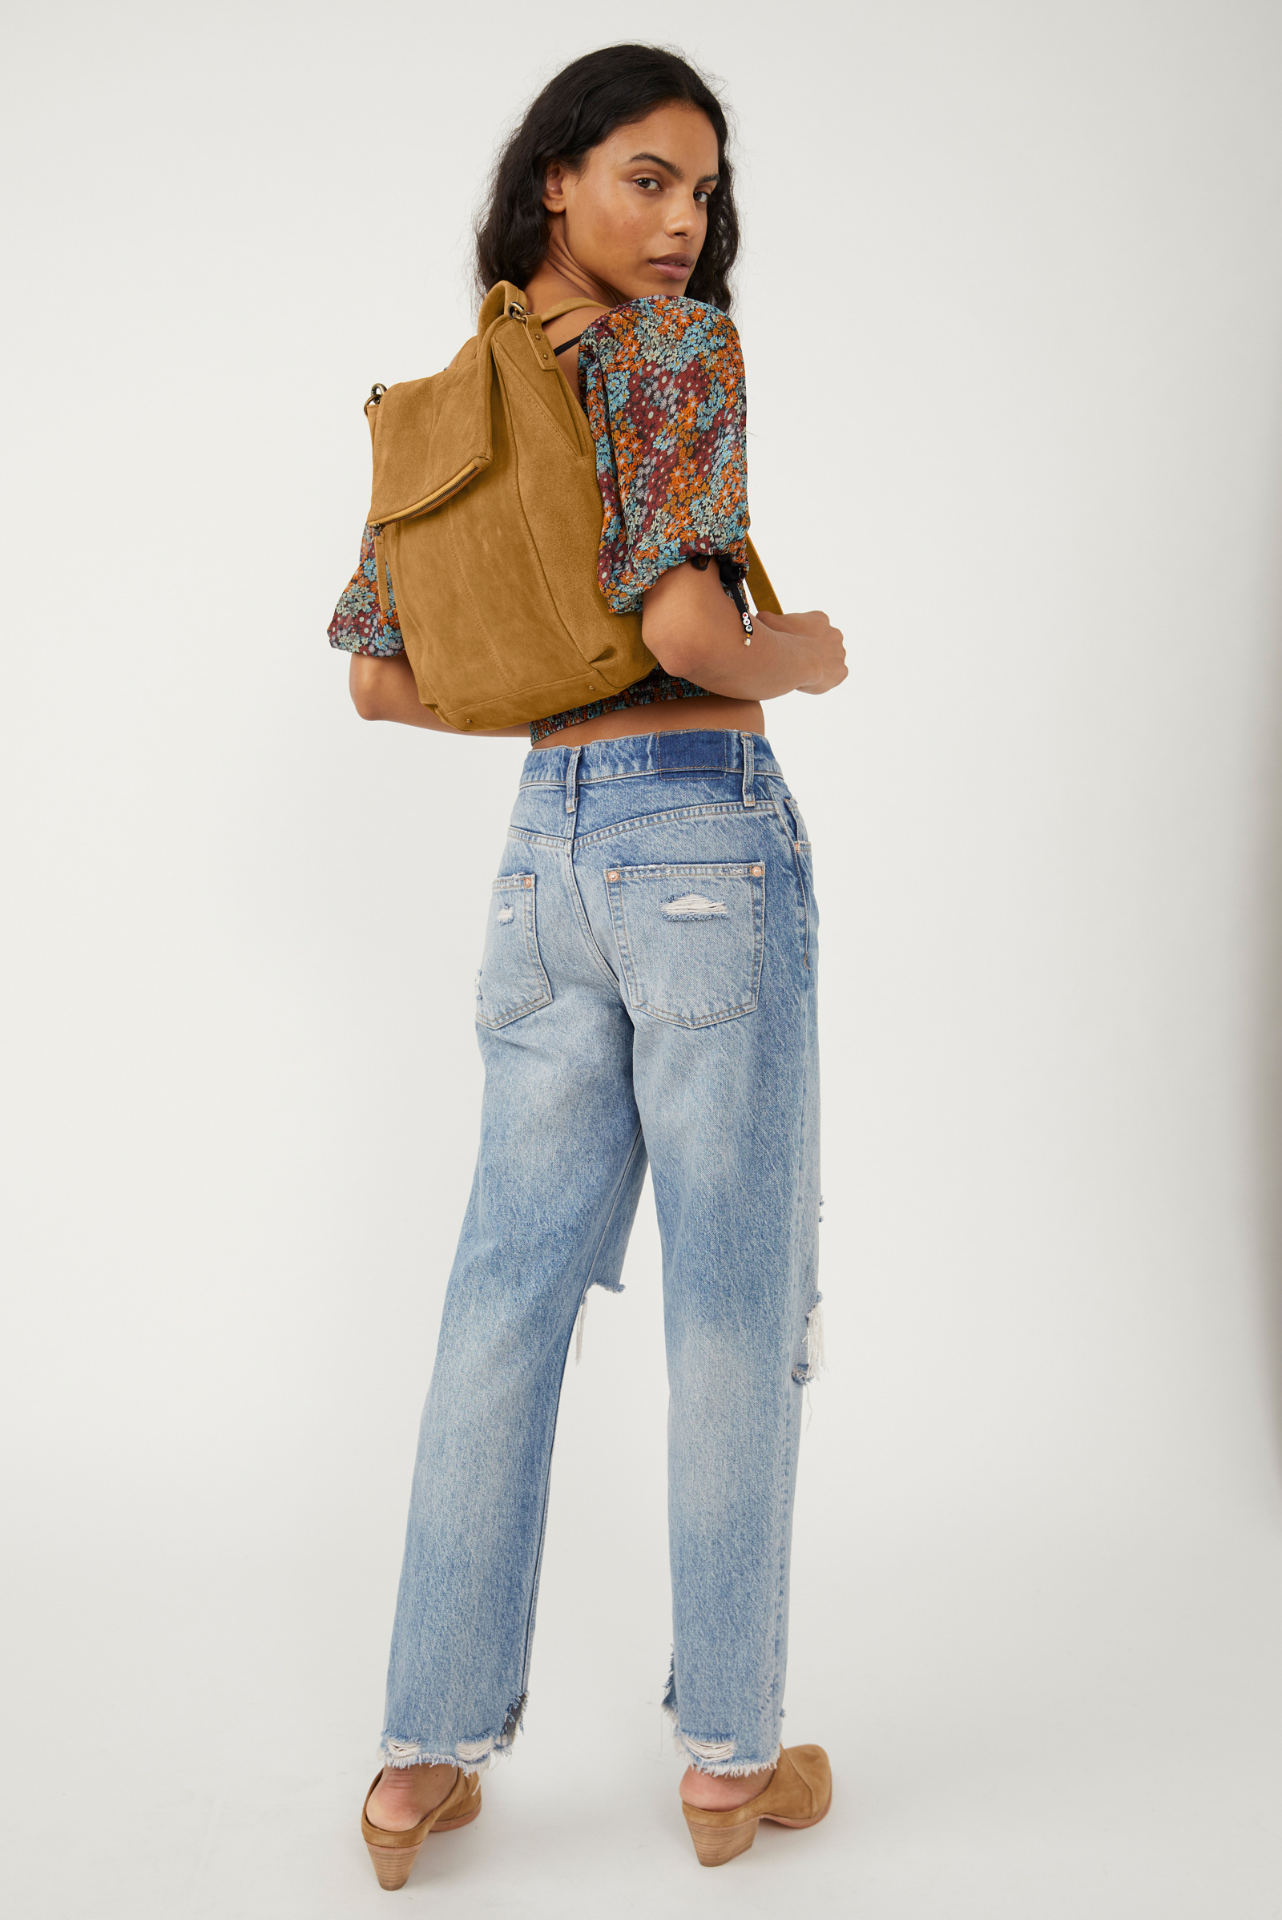 Camilla Suede Backpack